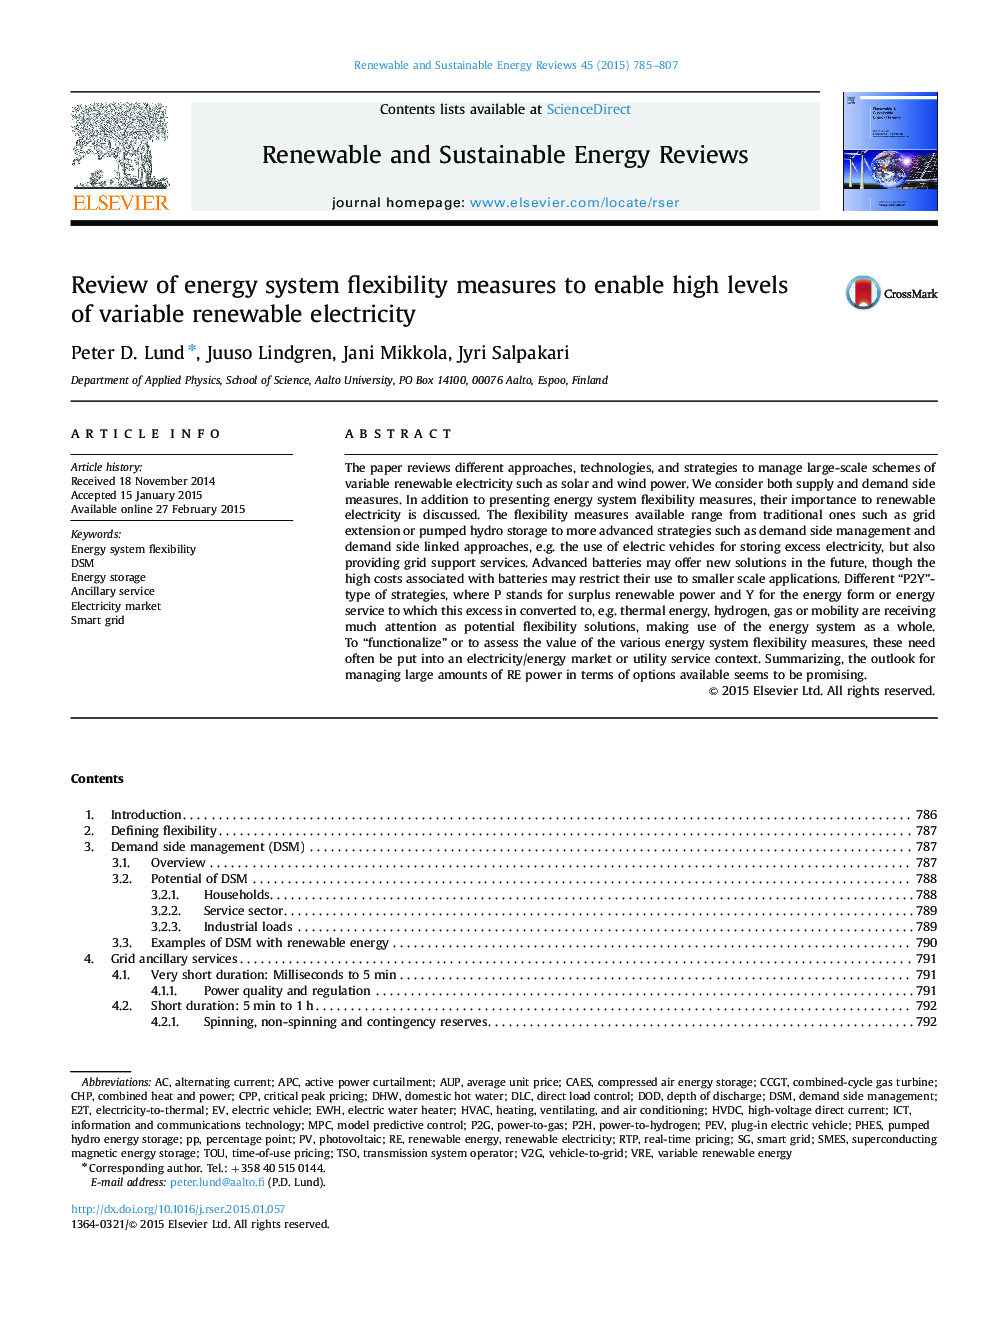 Review of energy system flexibility measures to enable high levels of variable renewable electricity